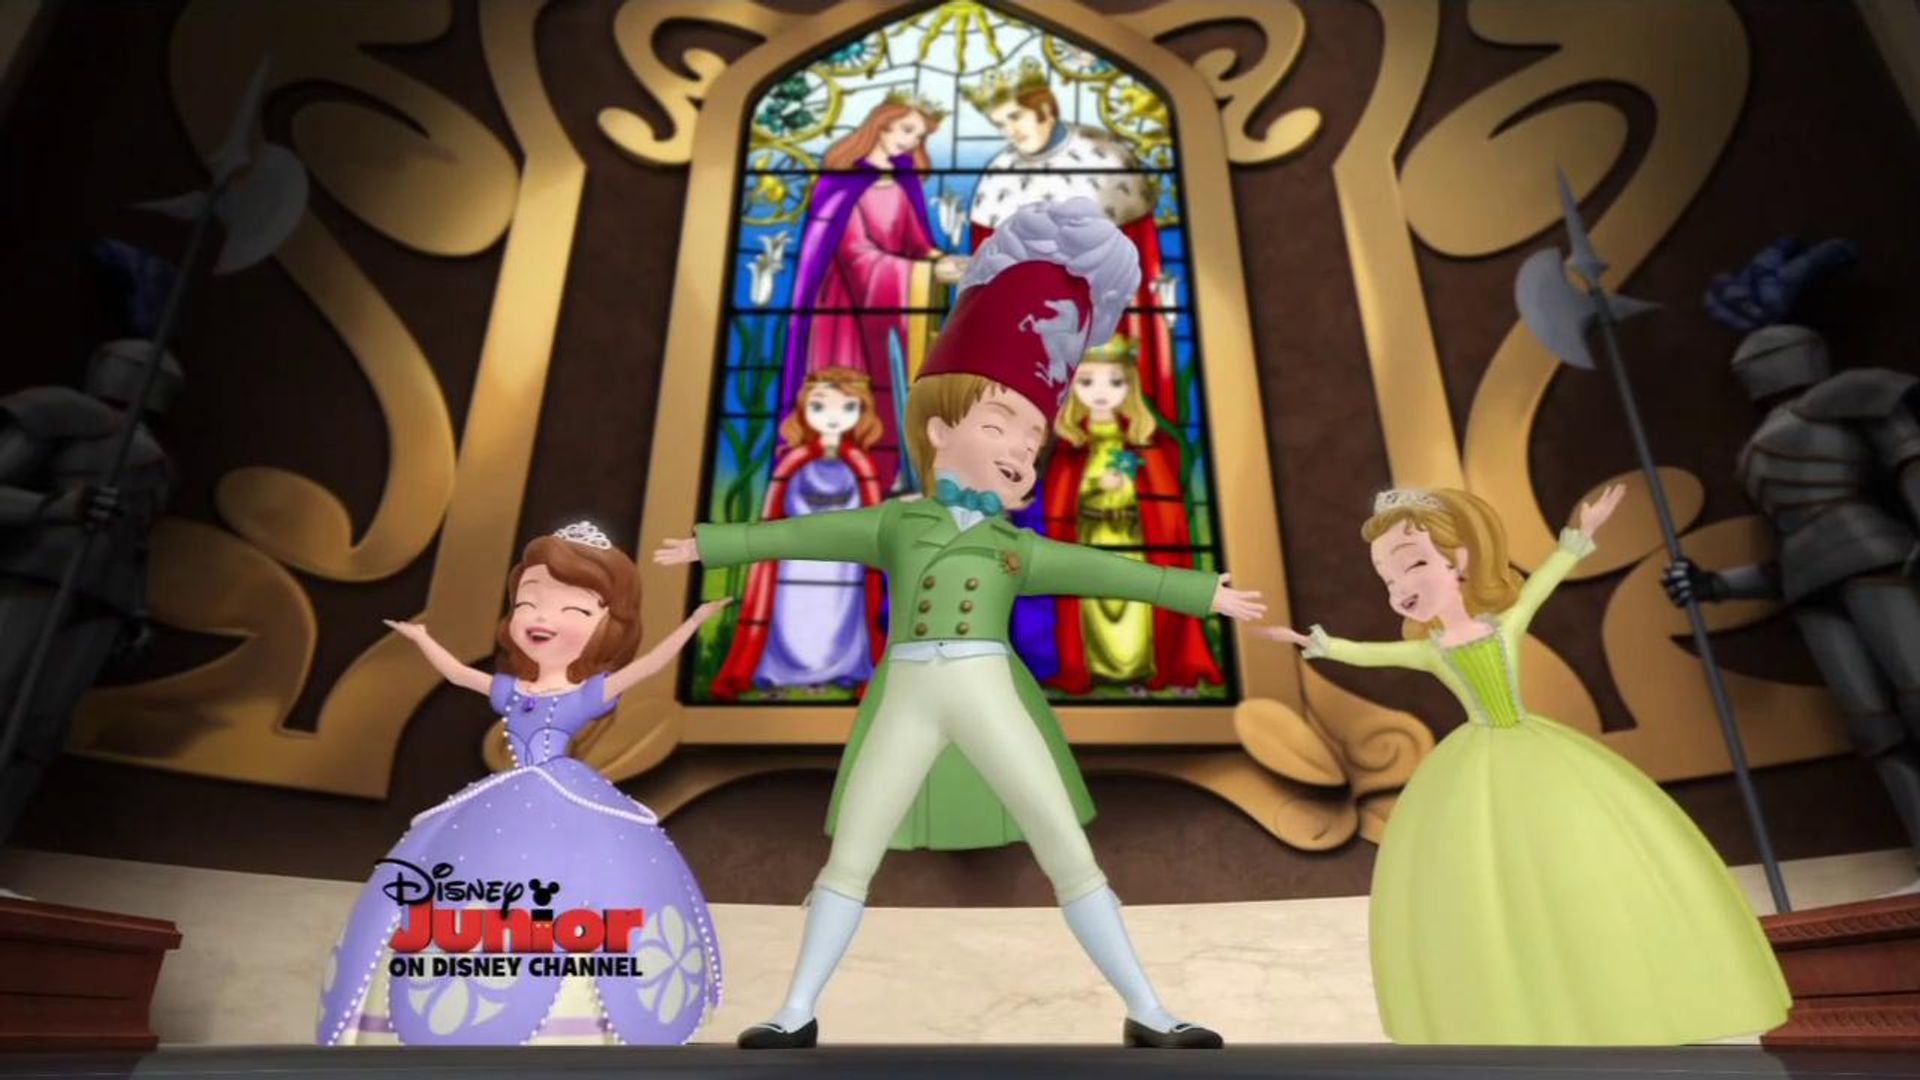 Sofia the First background